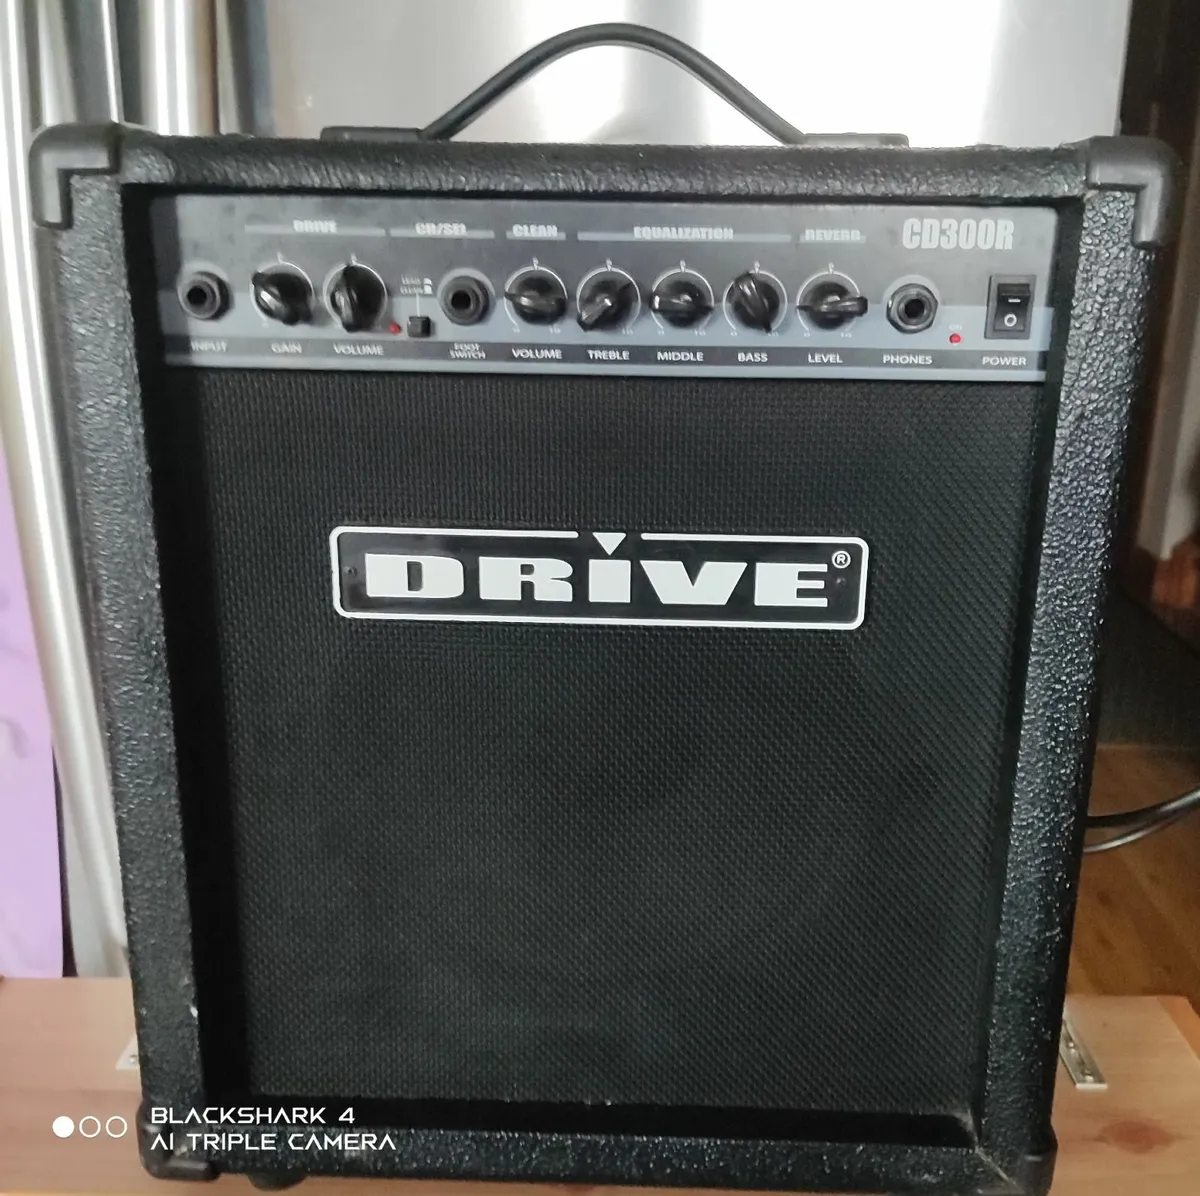 Drive CD-300R Guitar Combo Amplifier with Reverb.